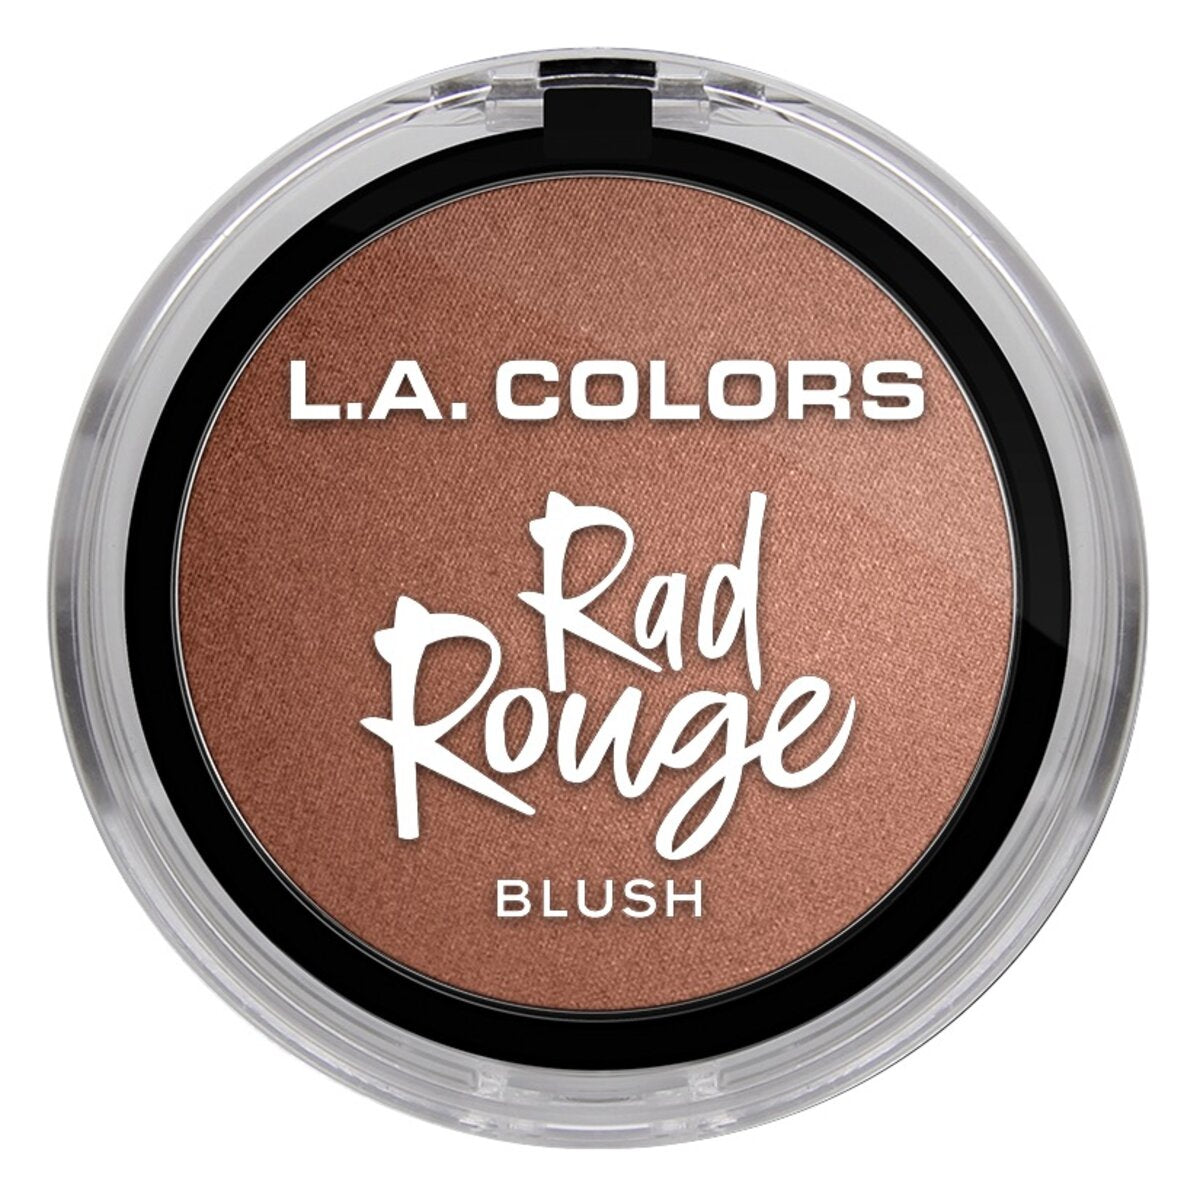 RAD ROUGE BLUSH PSYCH- RAD ROUGE BLUSH TO THE MAX GIRL - LA COLORS